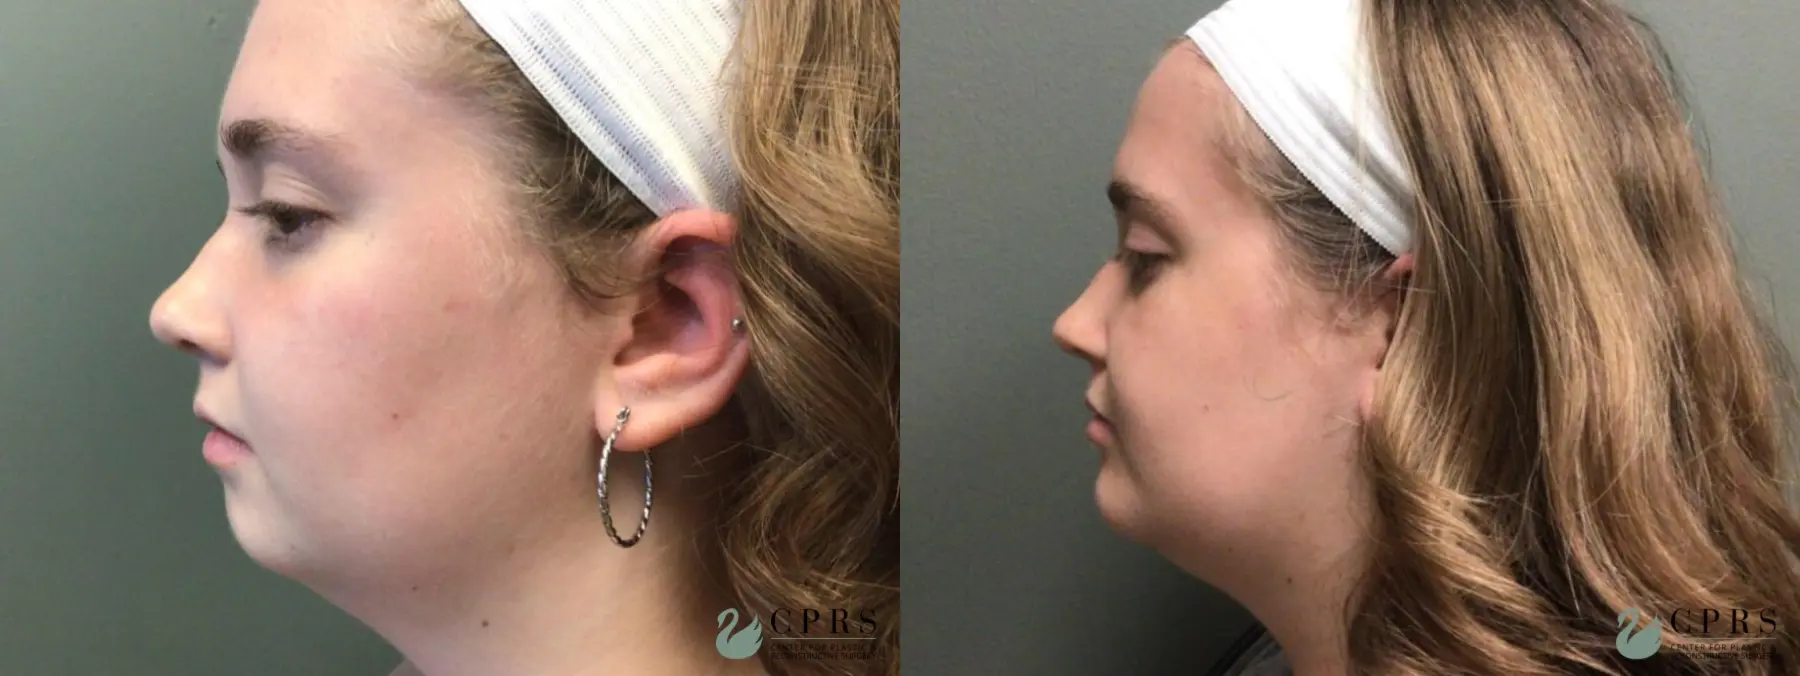 Chin Augmentation: Patient 3 - Before and After 3